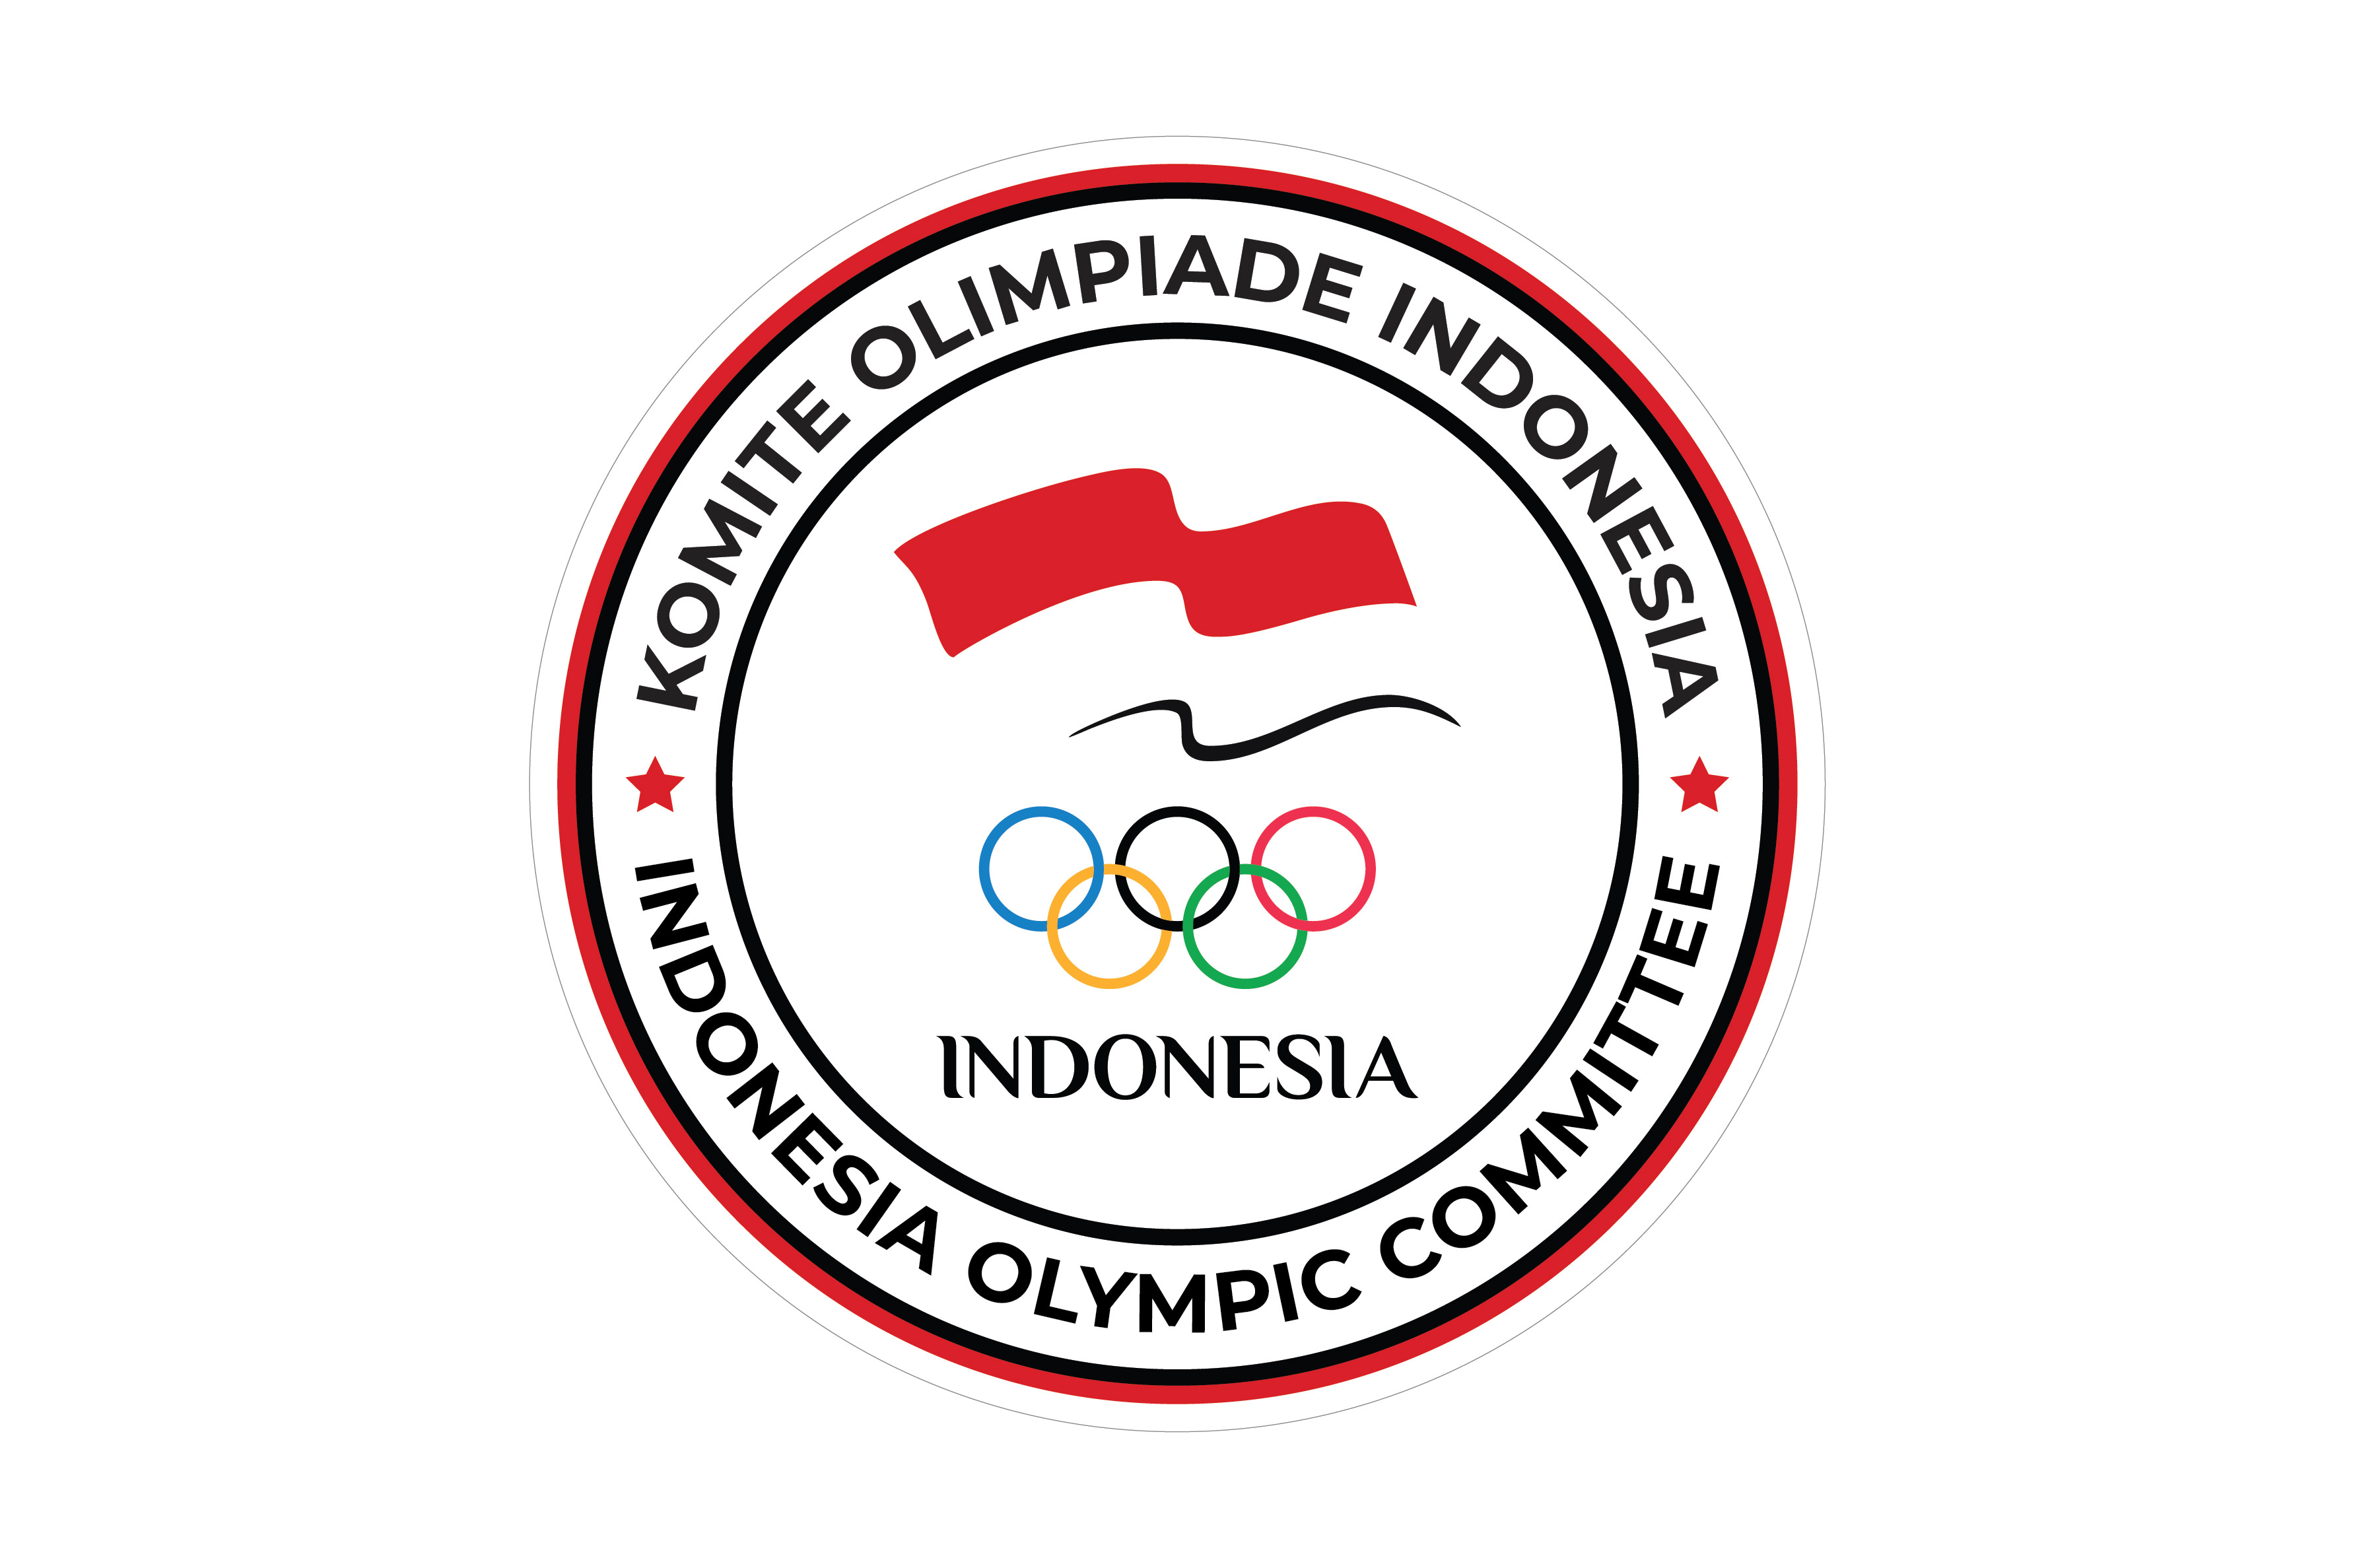 Procedure for Submitting a Proposal for Olympic Solidarity - Indonesia Olympic Commitee